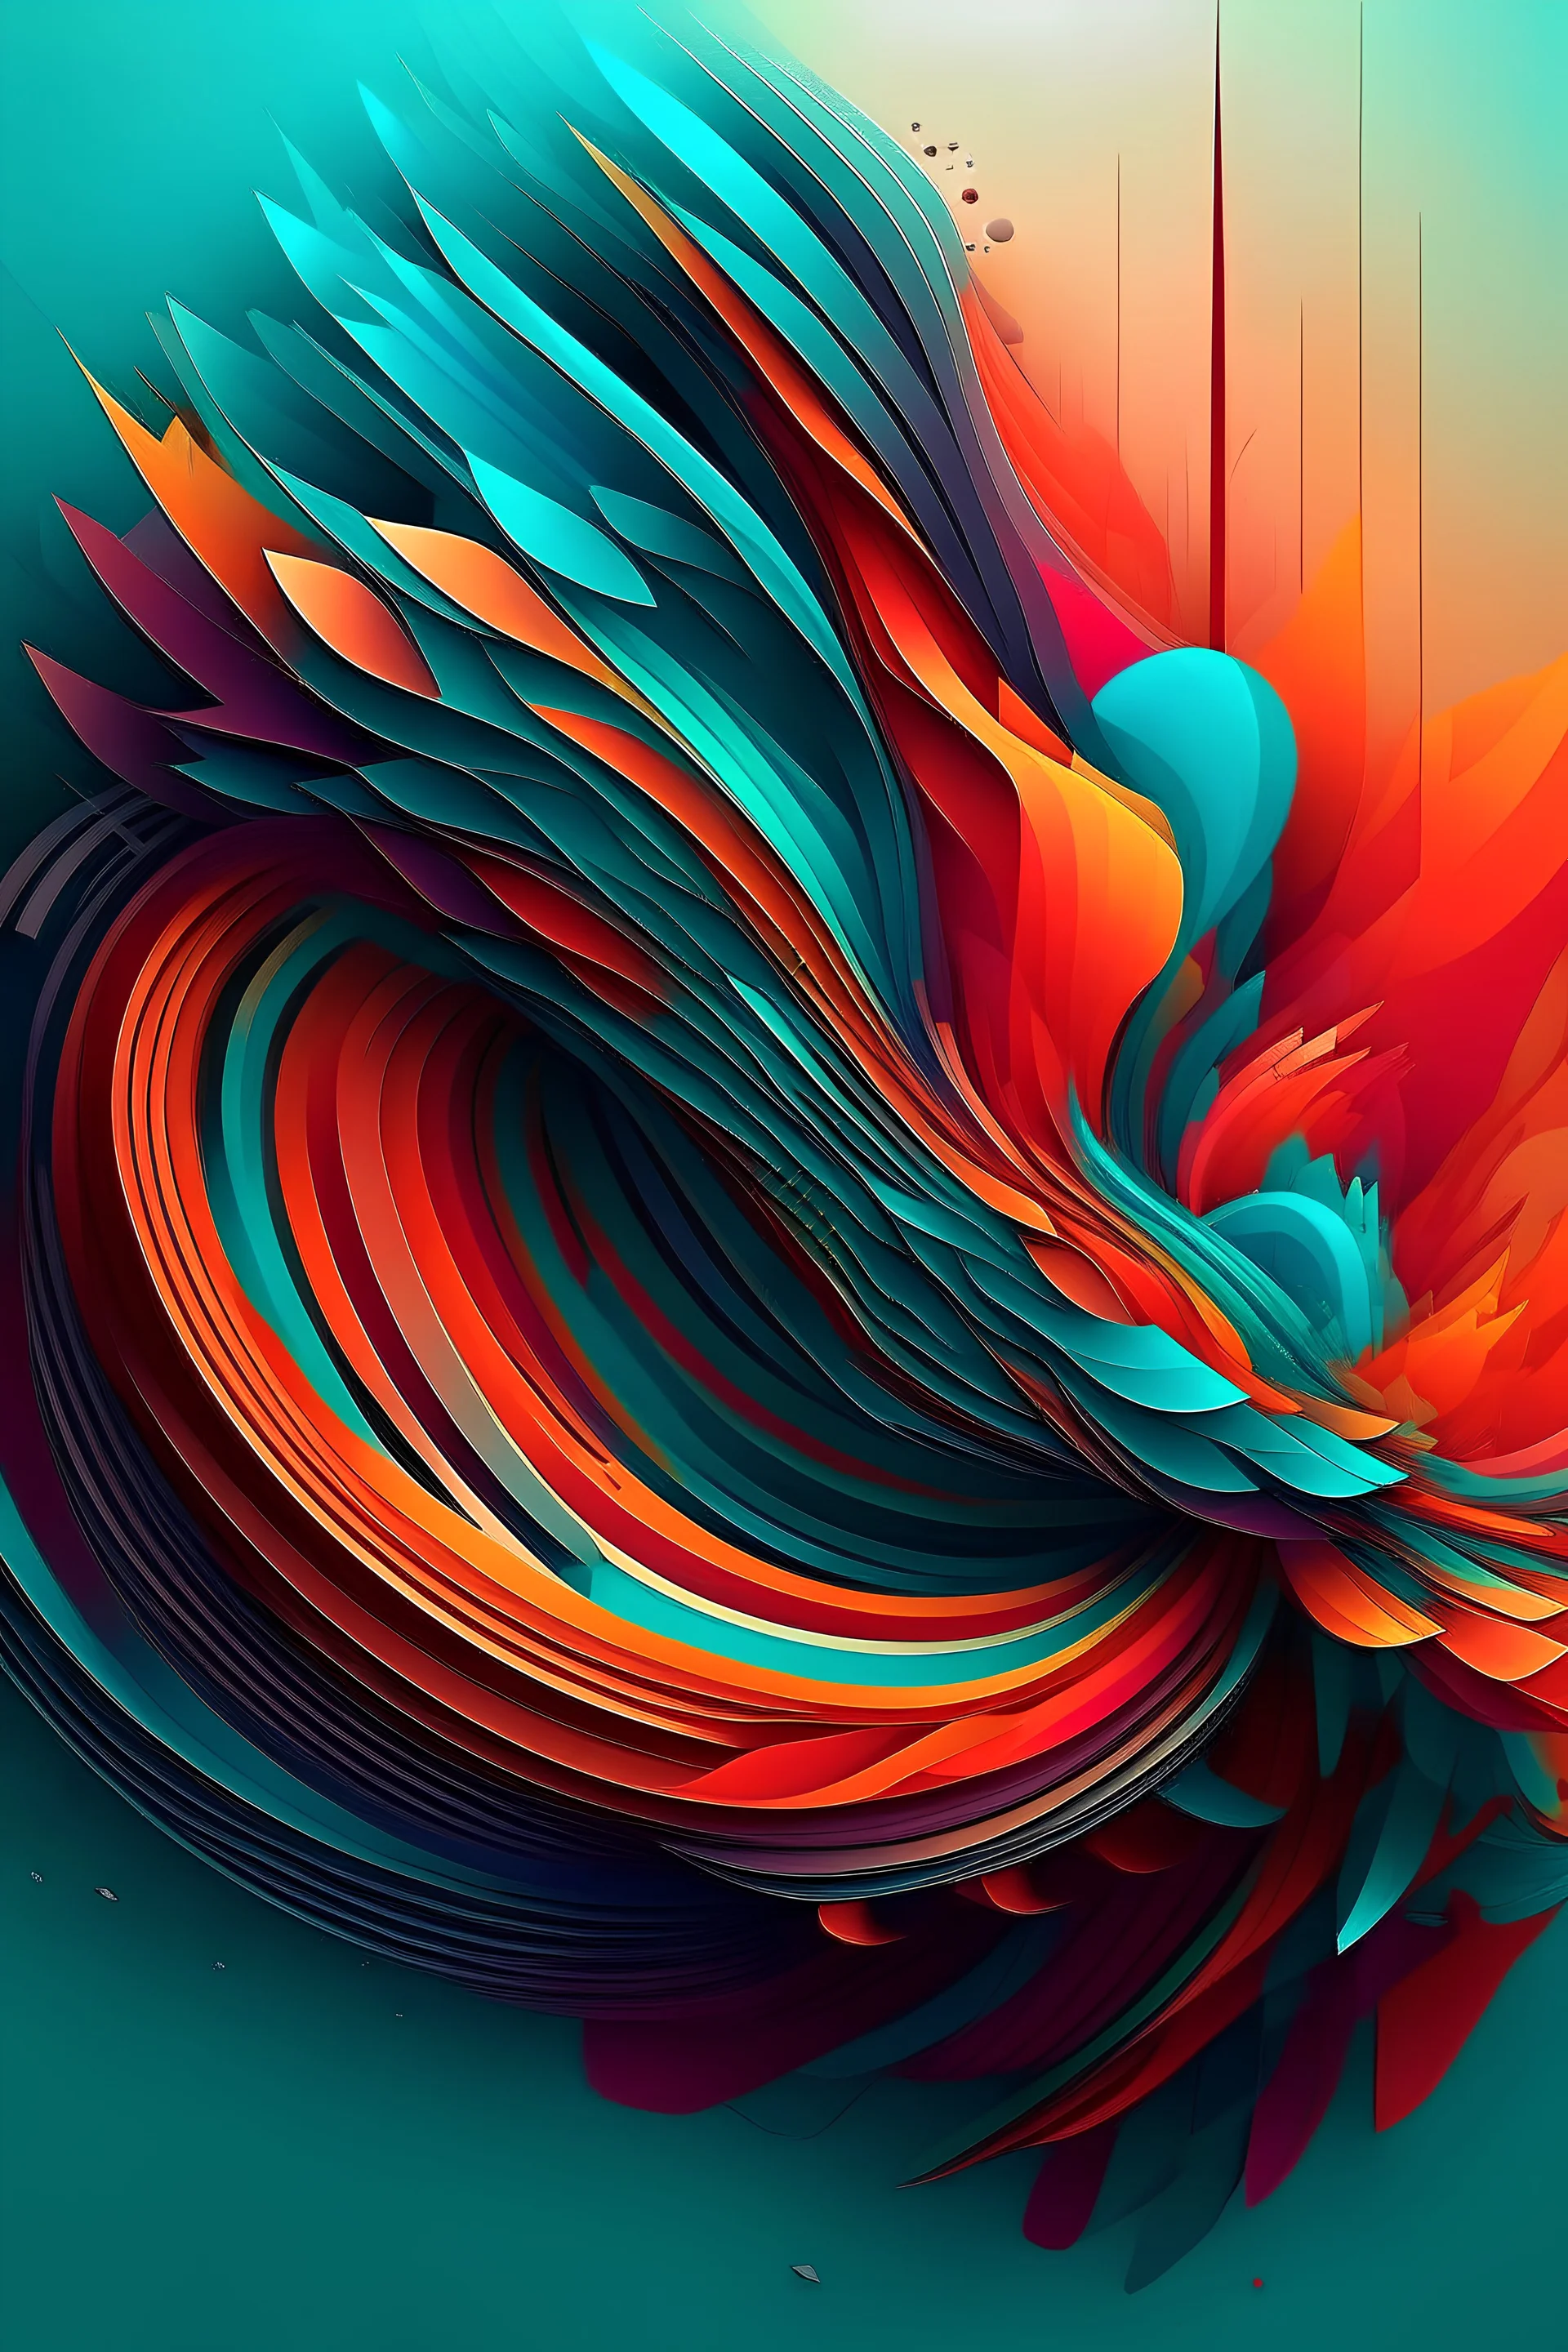 Generate an abstract design